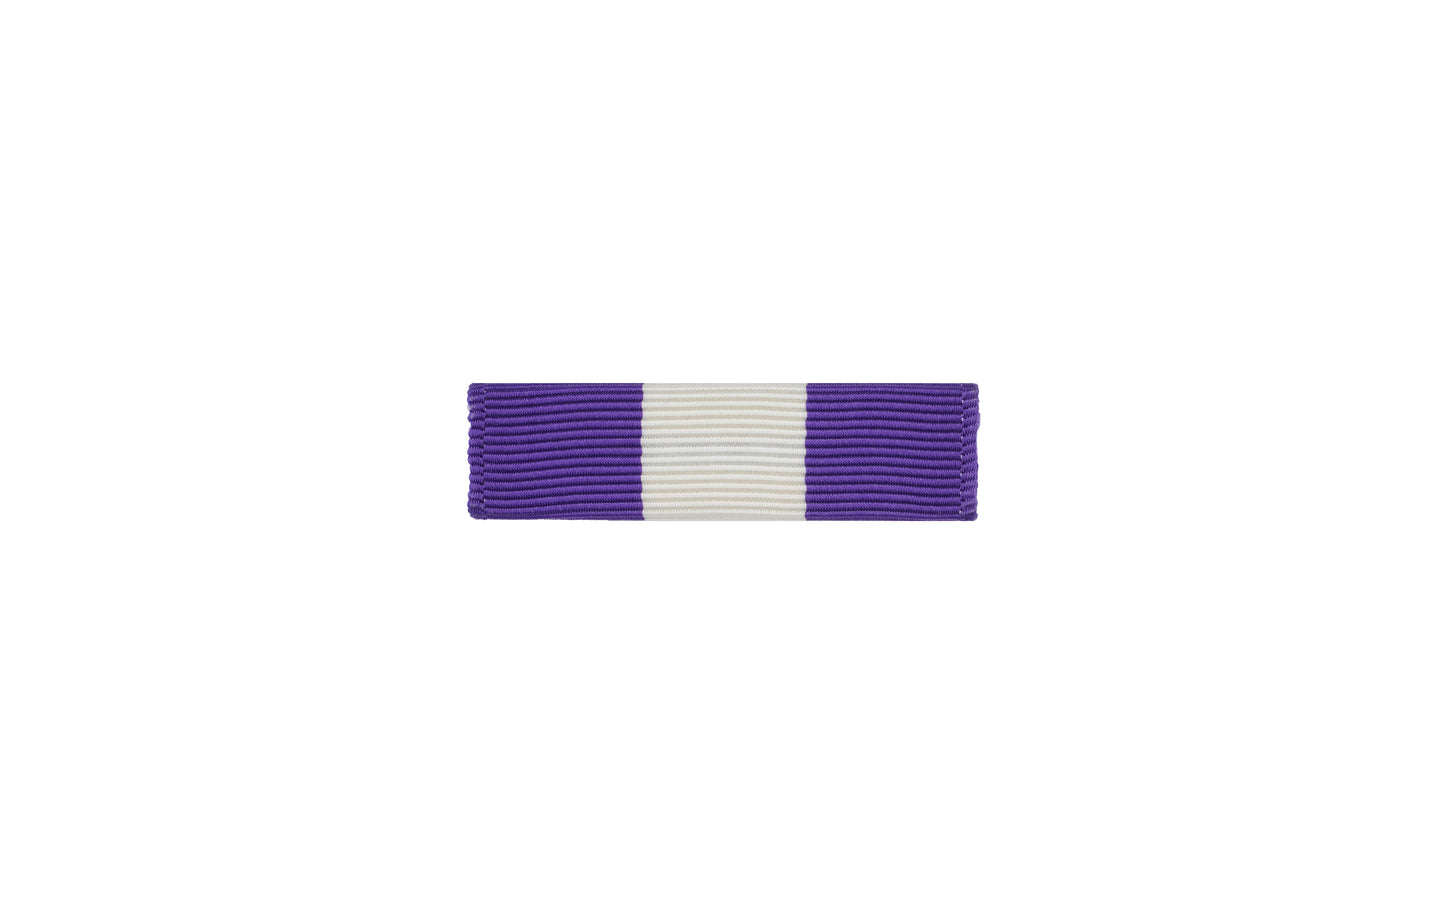 Joint Chiefs of Staff Distinguished Public service ribbon